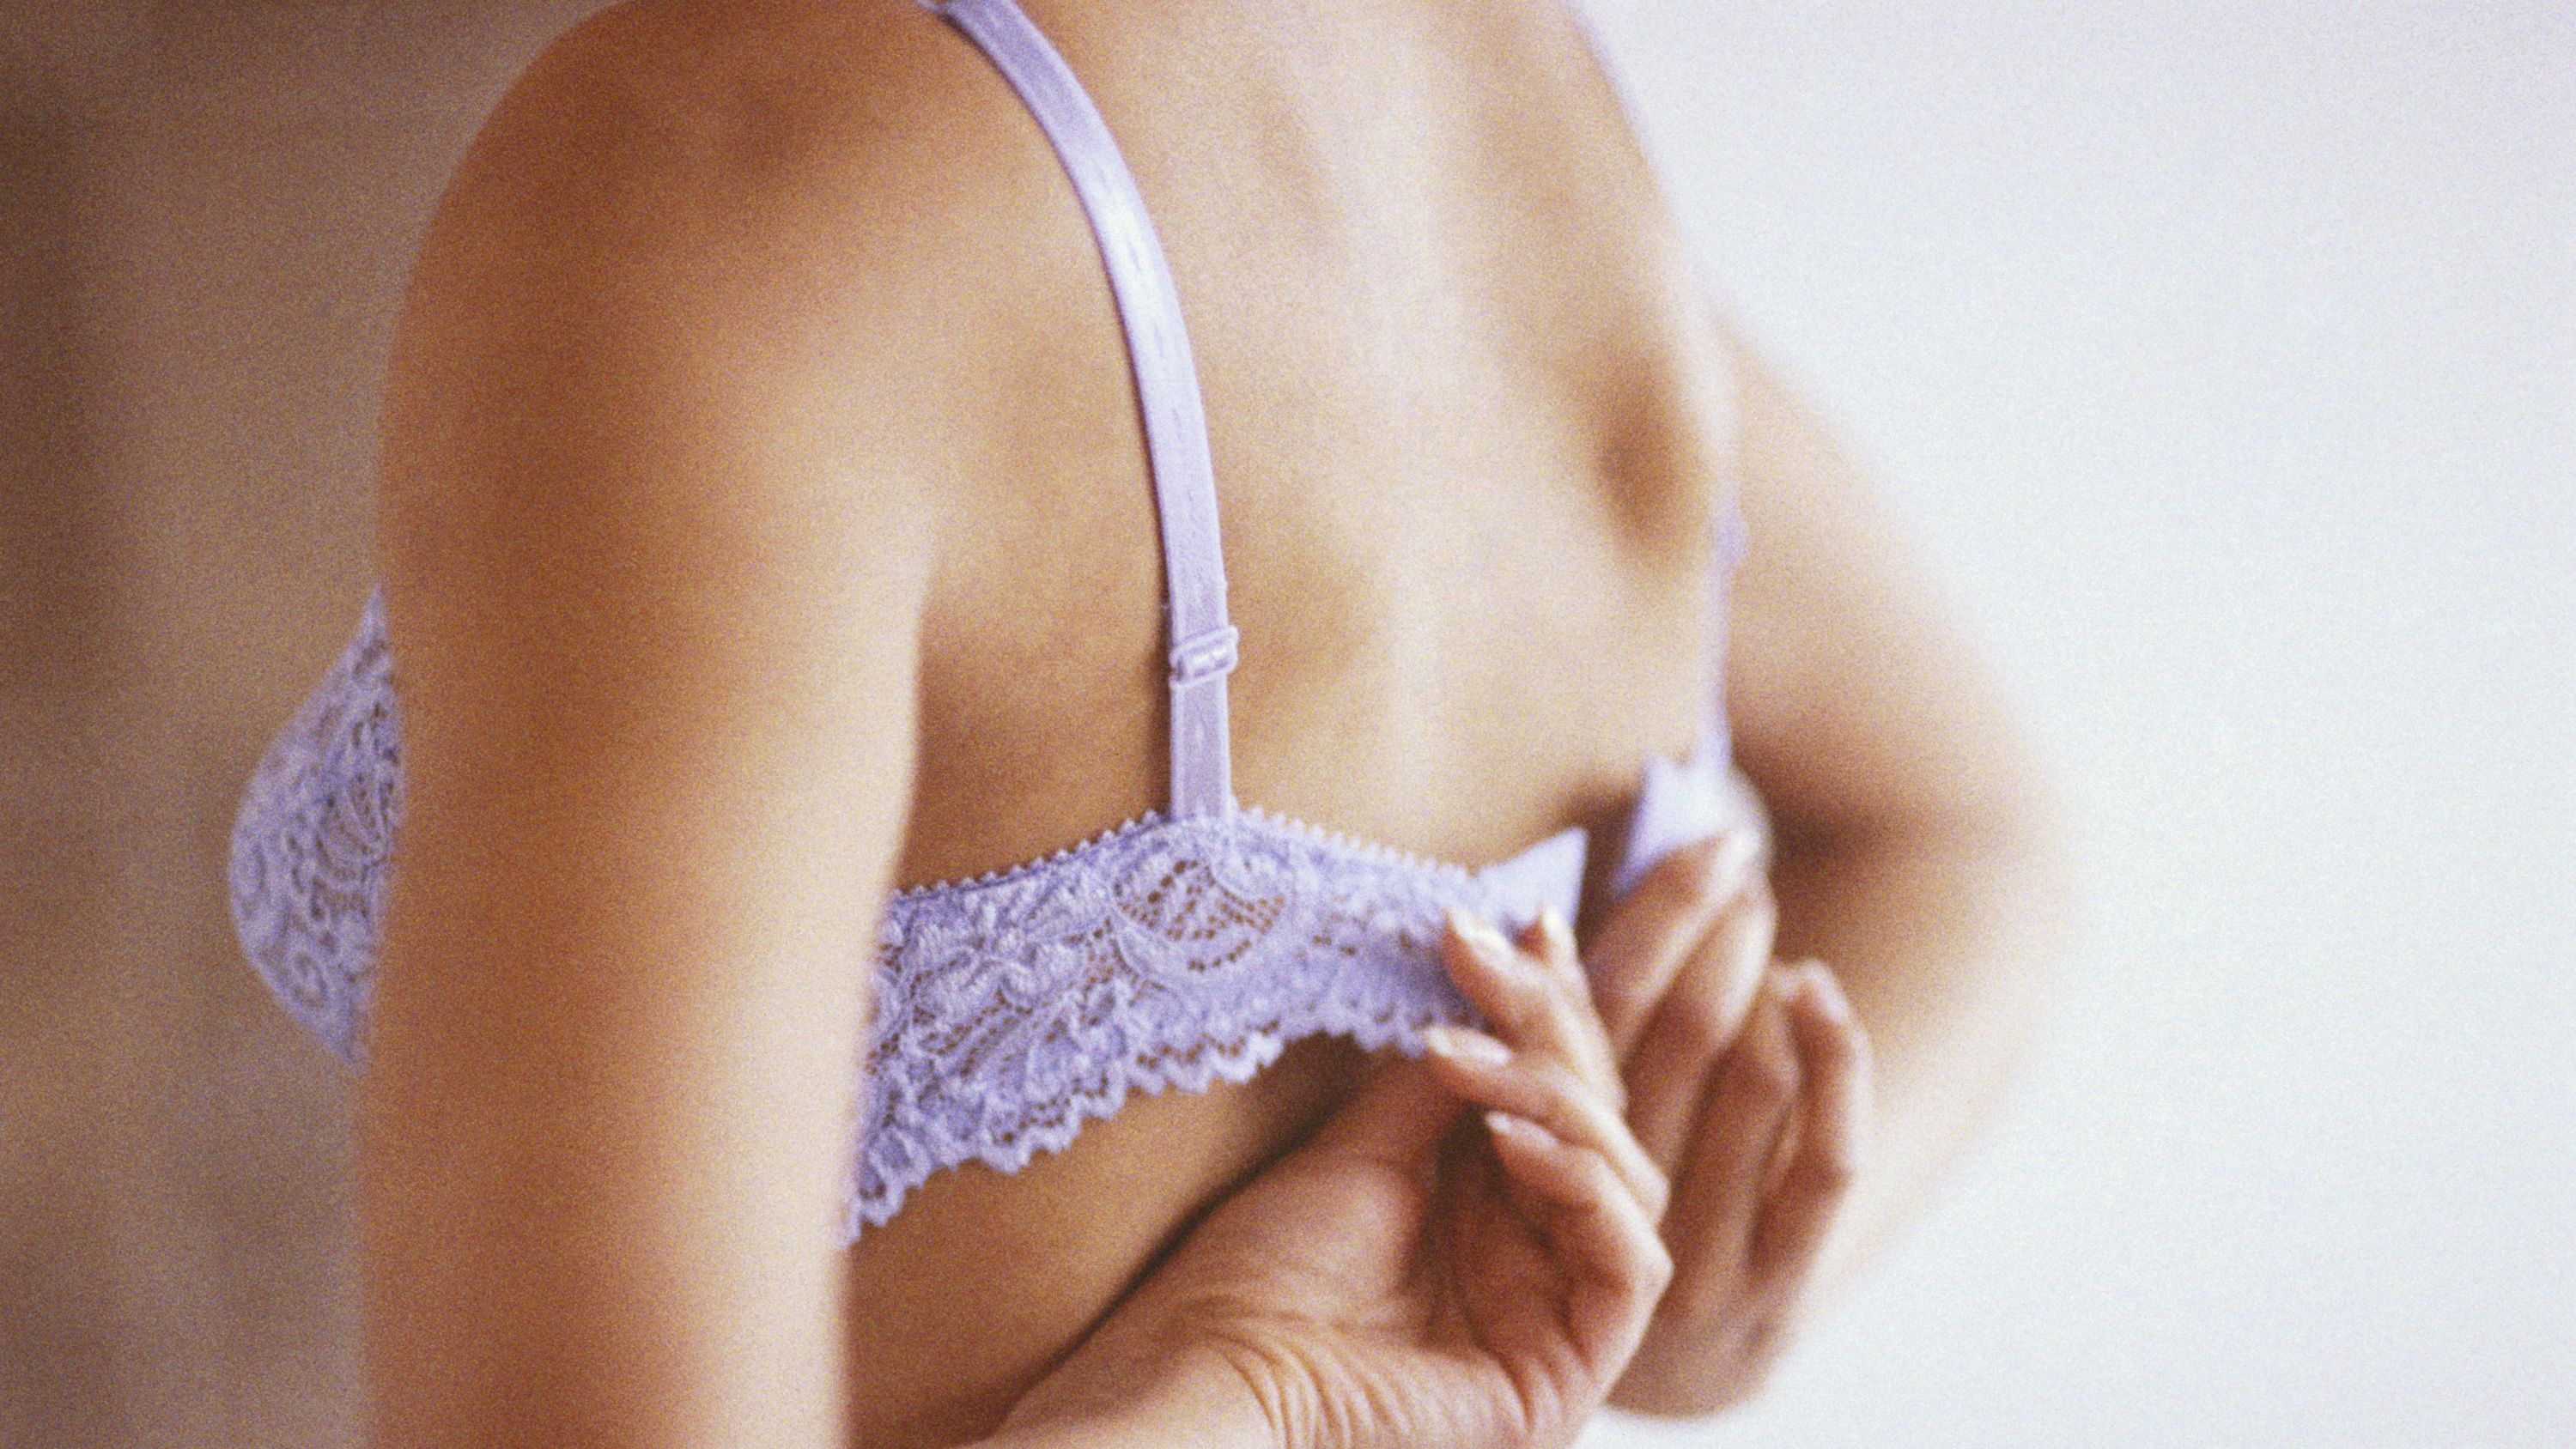 There is a right way to put on your bra